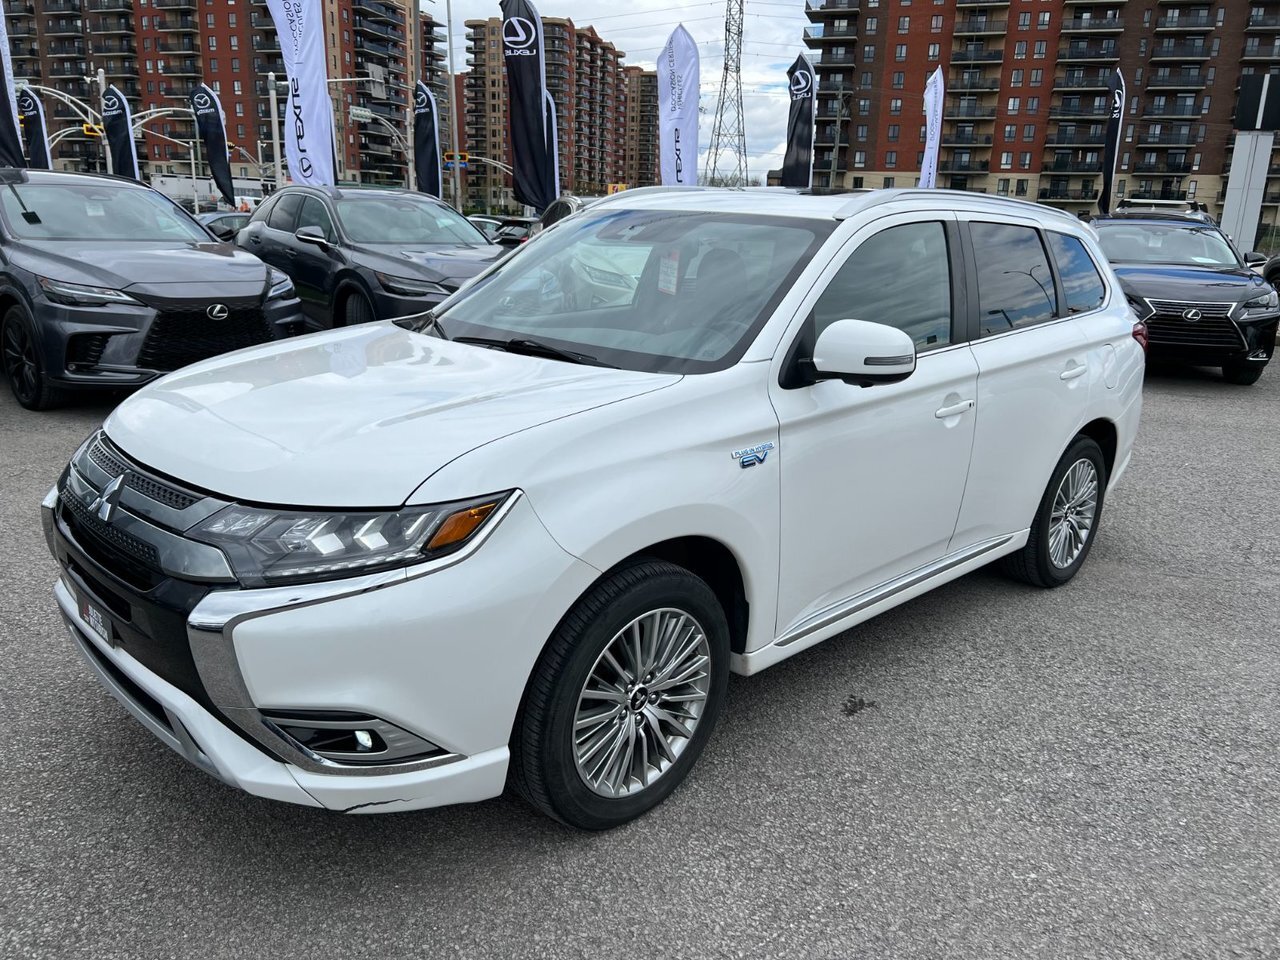 2020 Mitsubishi Outlander PHEV S-AW / CAMERA 360 / TOIT OUVRANT / MAGS-18''